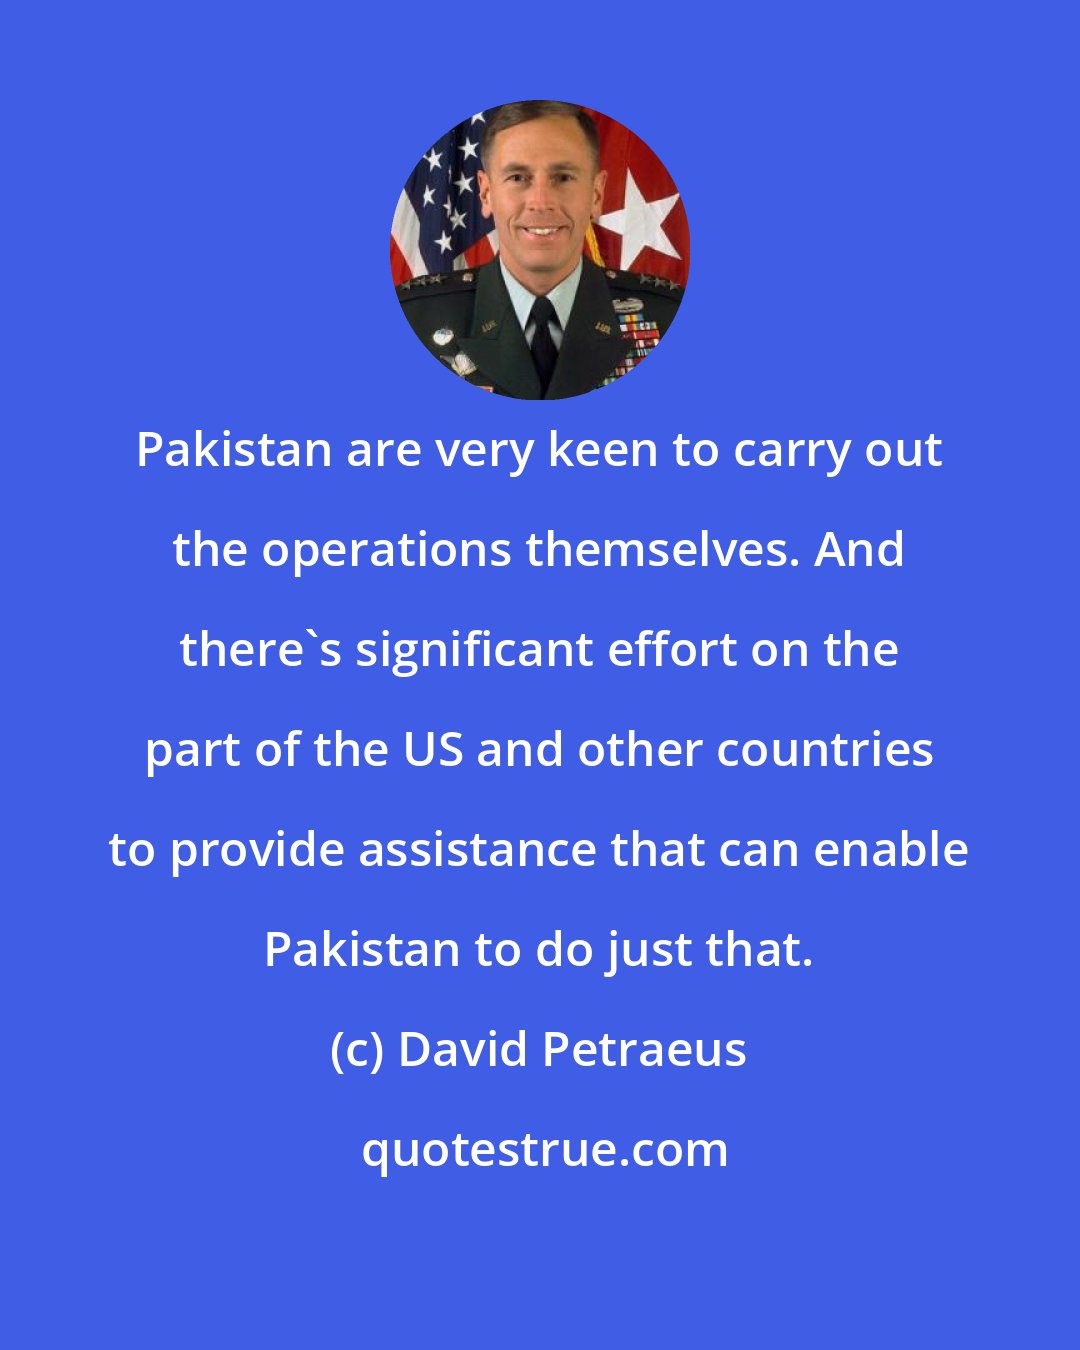 David Petraeus: Pakistan are very keen to carry out the operations themselves. And there's significant effort on the part of the US and other countries to provide assistance that can enable Pakistan to do just that.